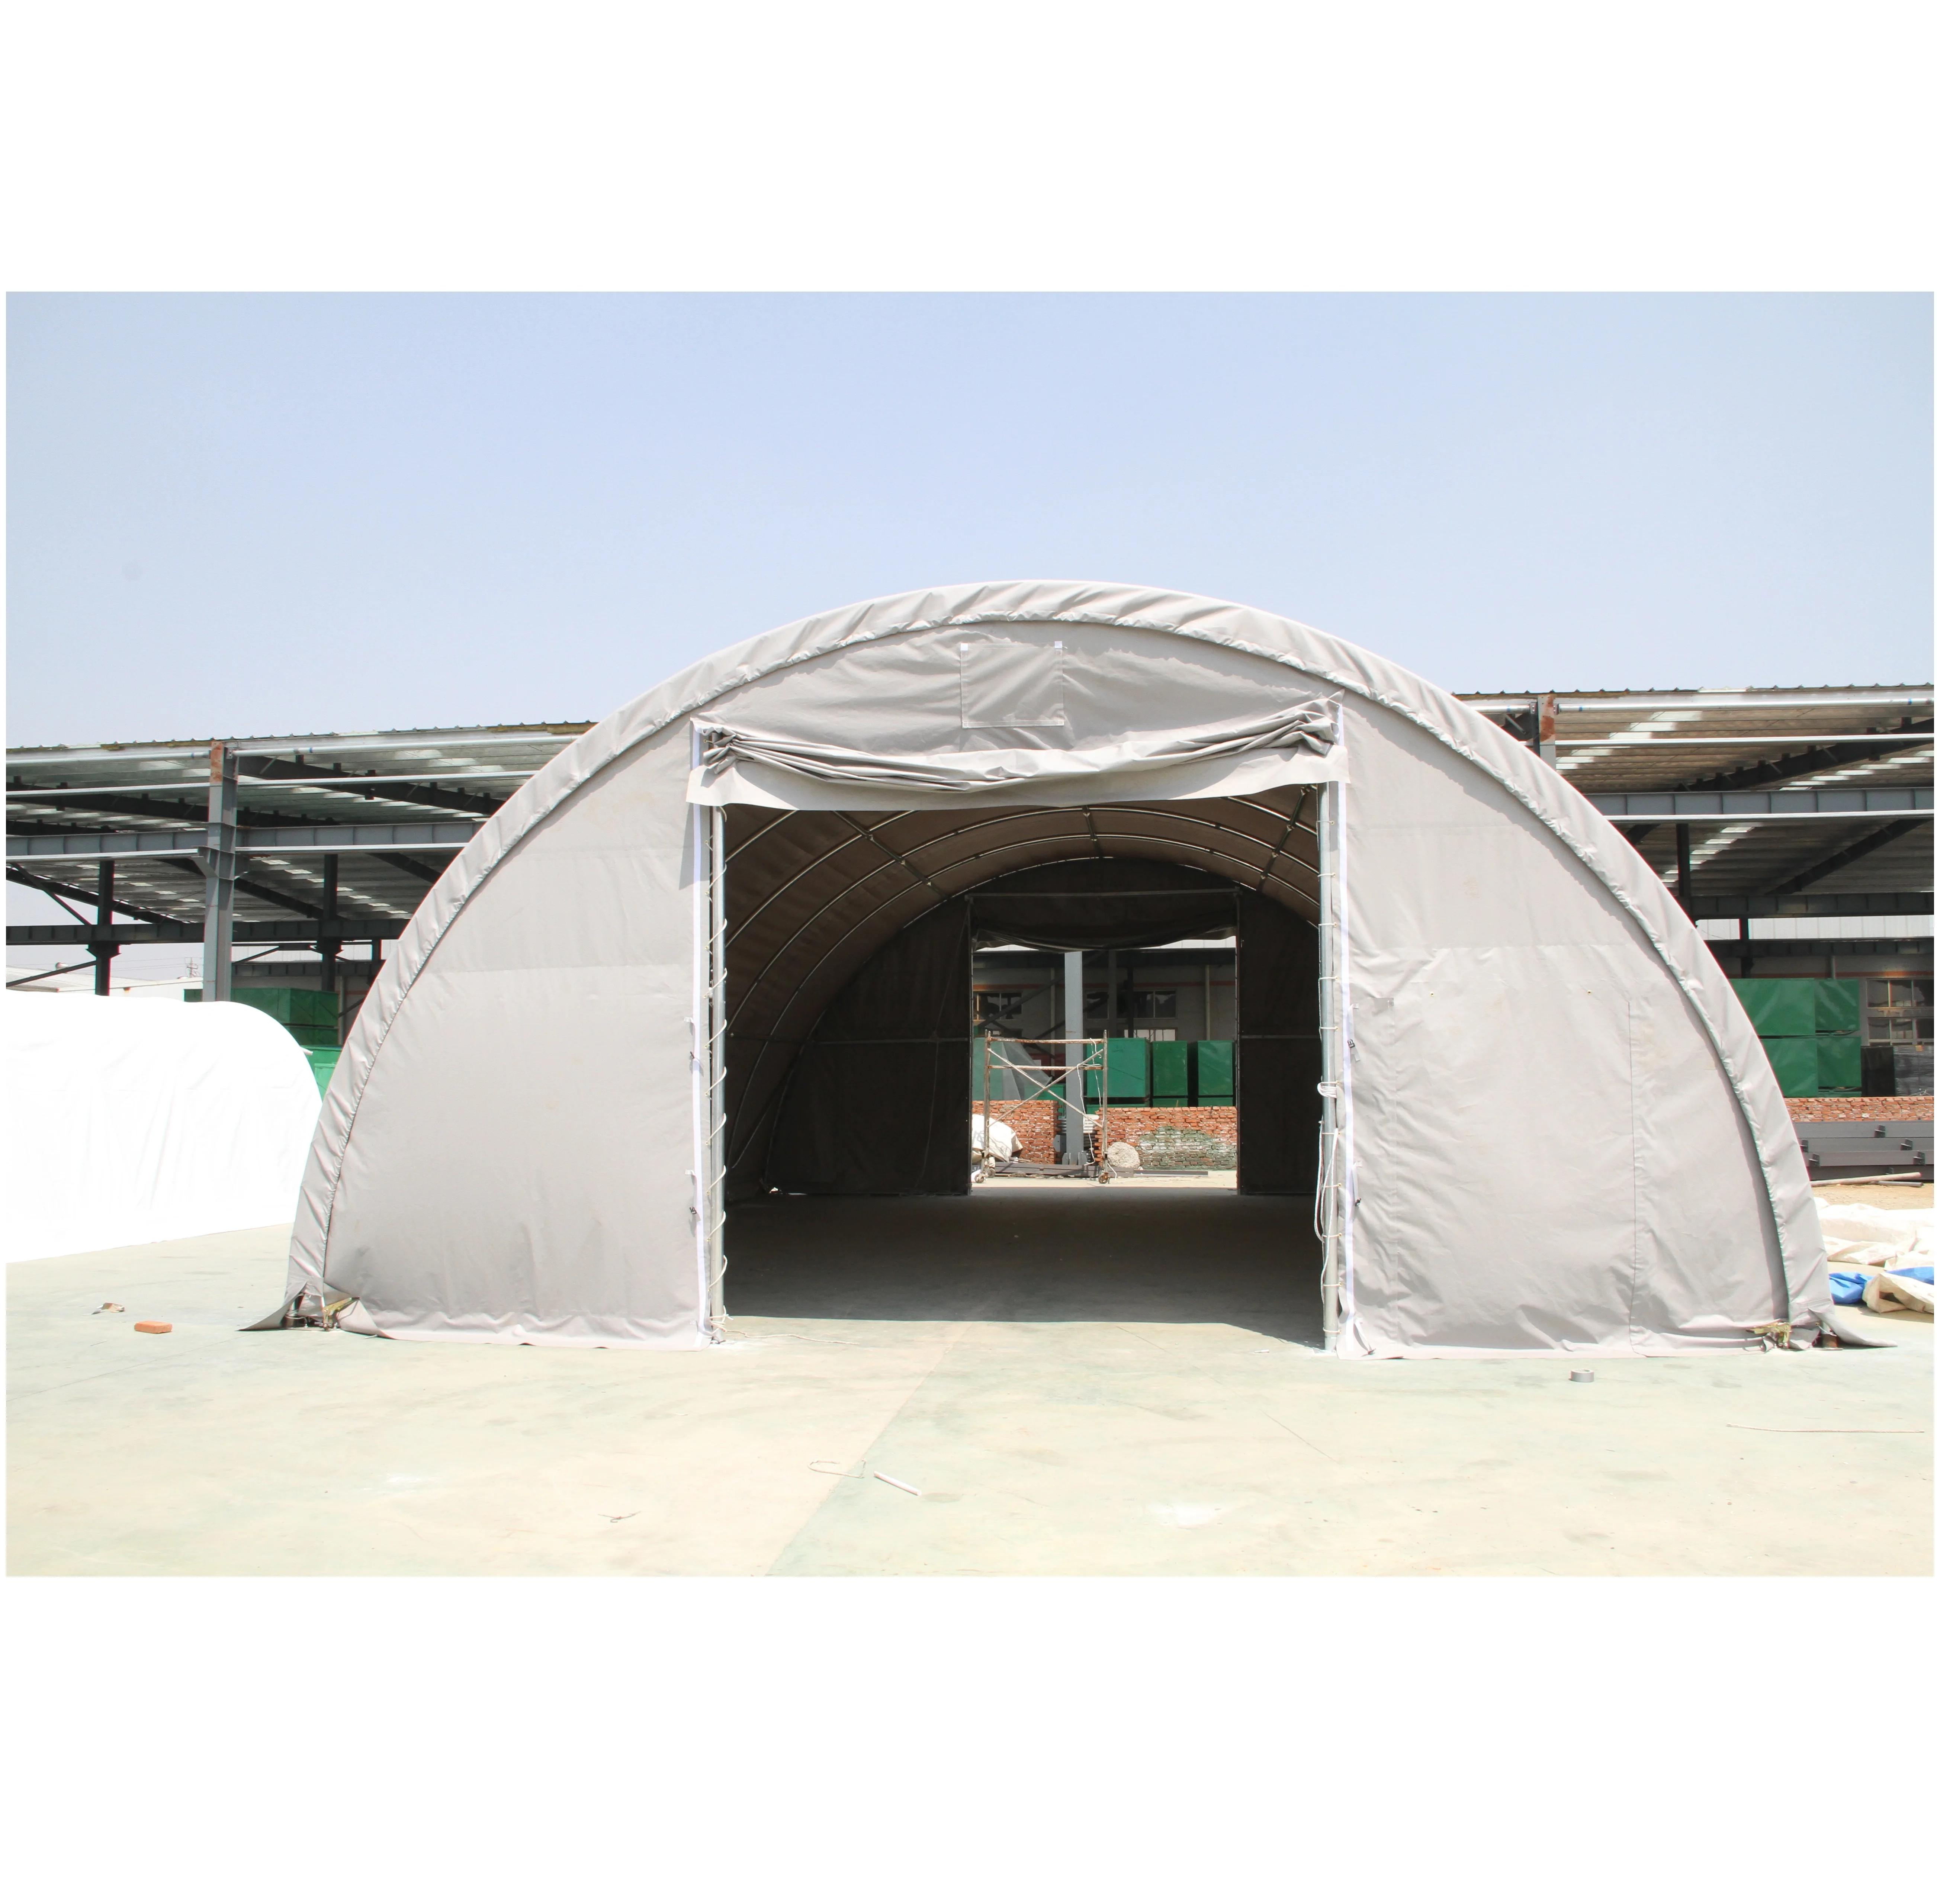 Dome Suihe Storage Fabric Building Tent S306515R